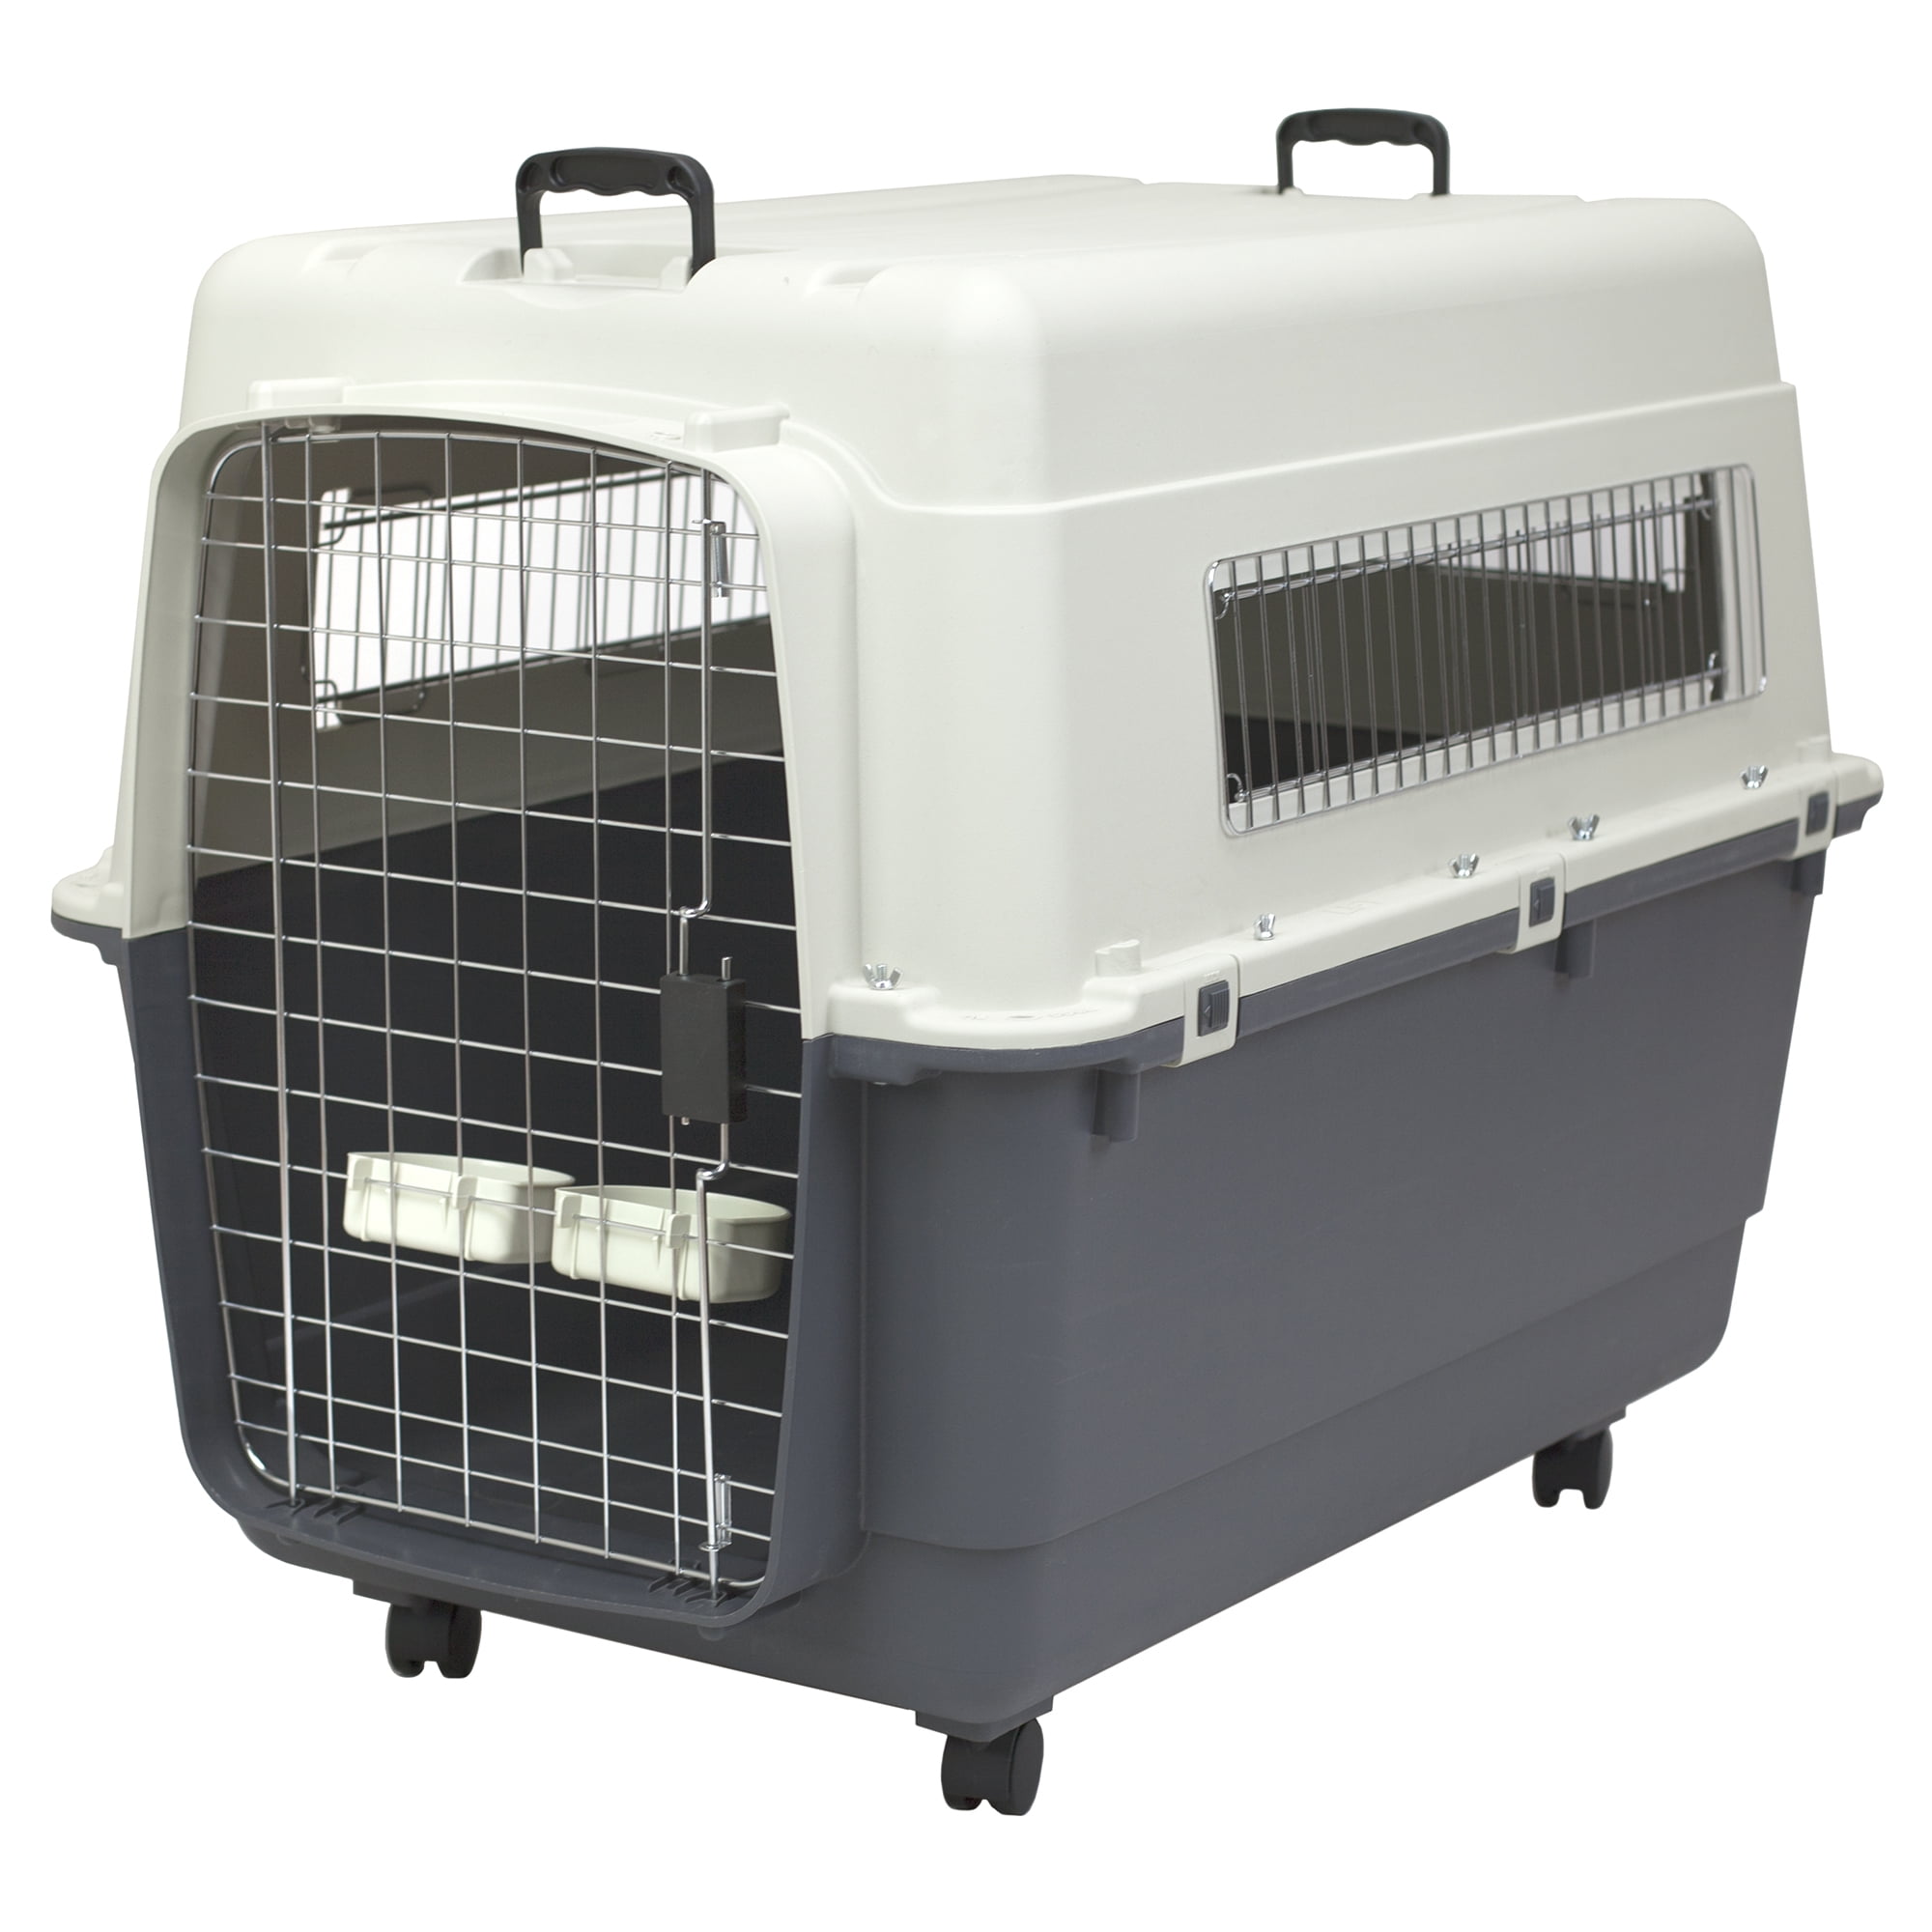 Portopet Carriers & Crates - Airline Approved - Dog